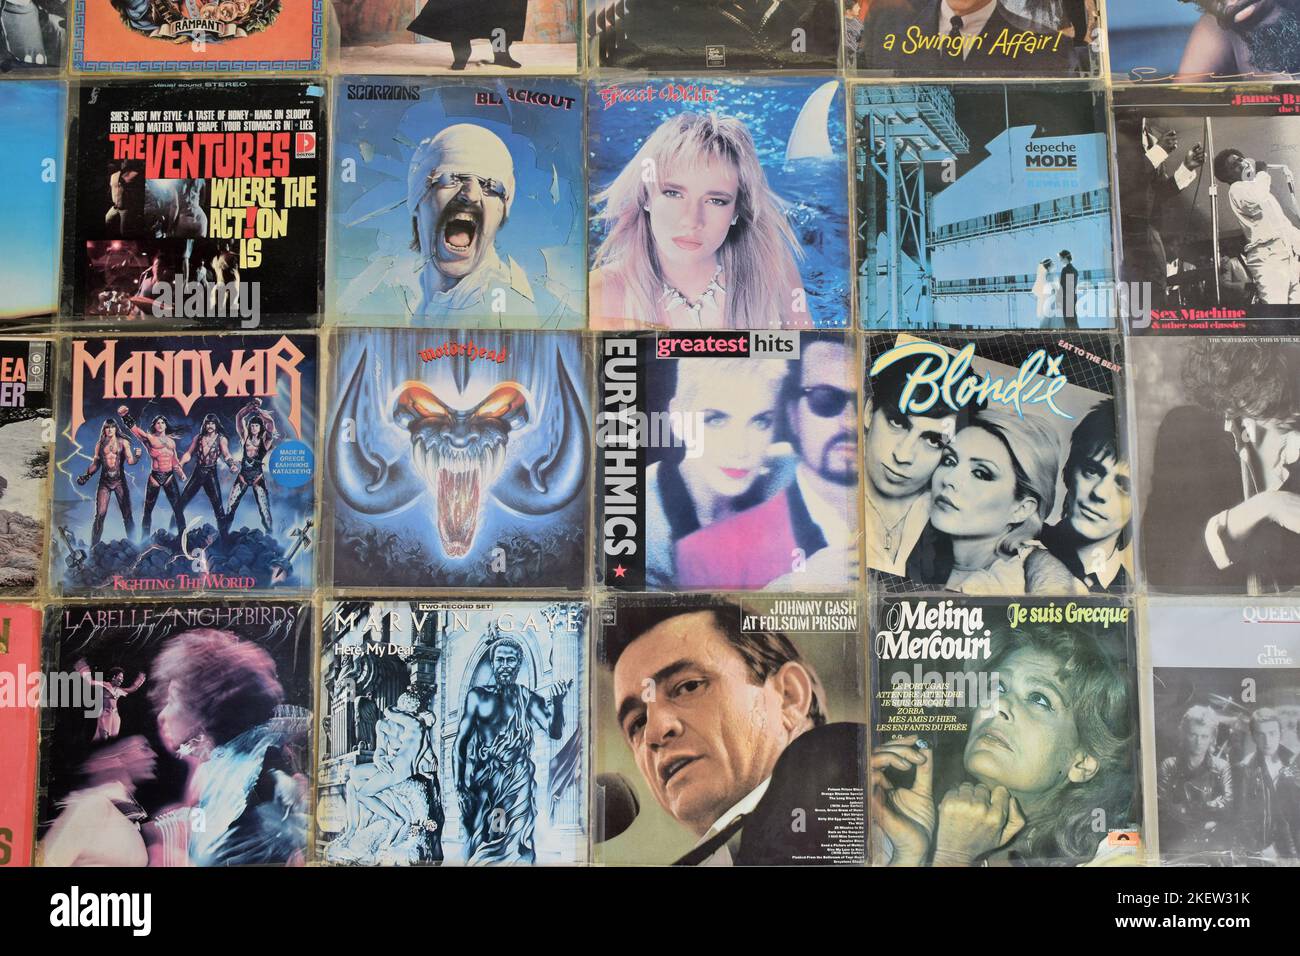 Athens, Greece - April 1, 2018: Vintage pop rock music vinyl album covers on record store wall. Stock Photo